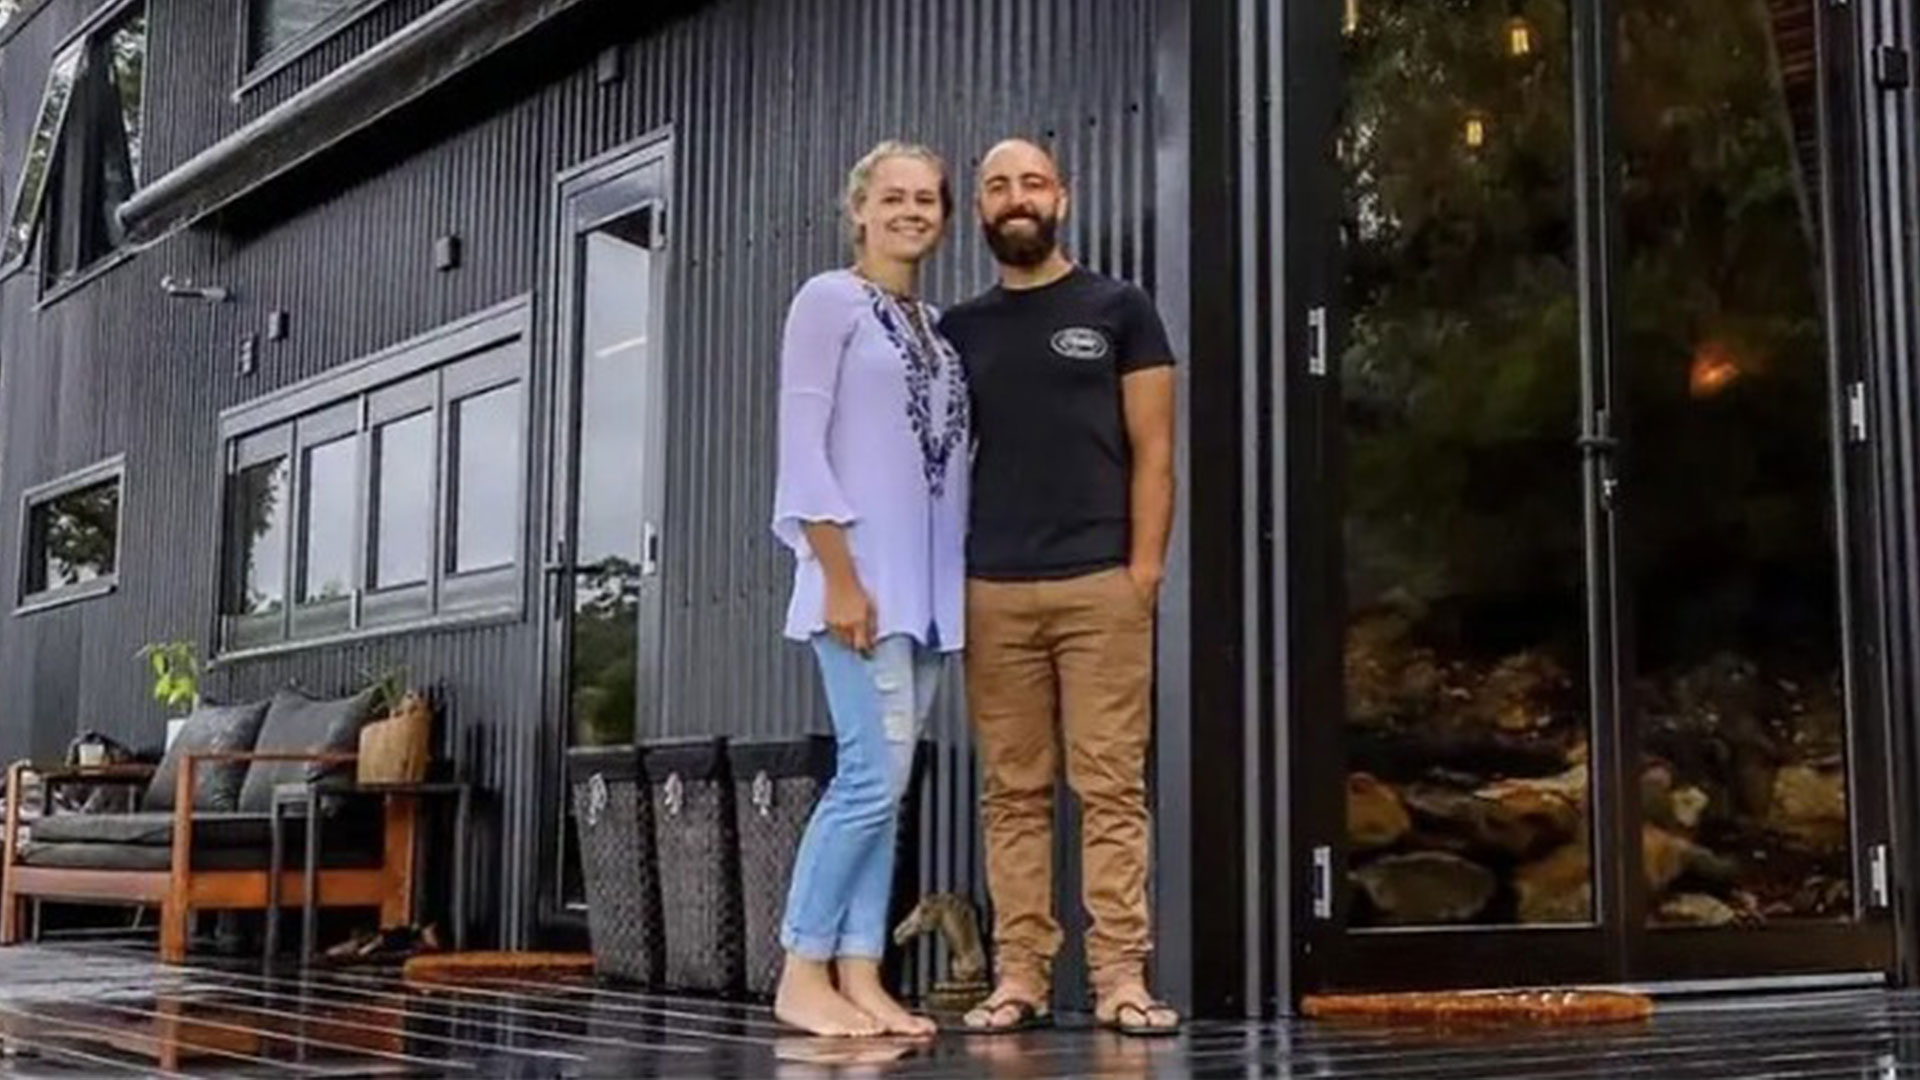 My Husband And I Built A Tiny House So We Could Live Cheaply In A Beautiful Location